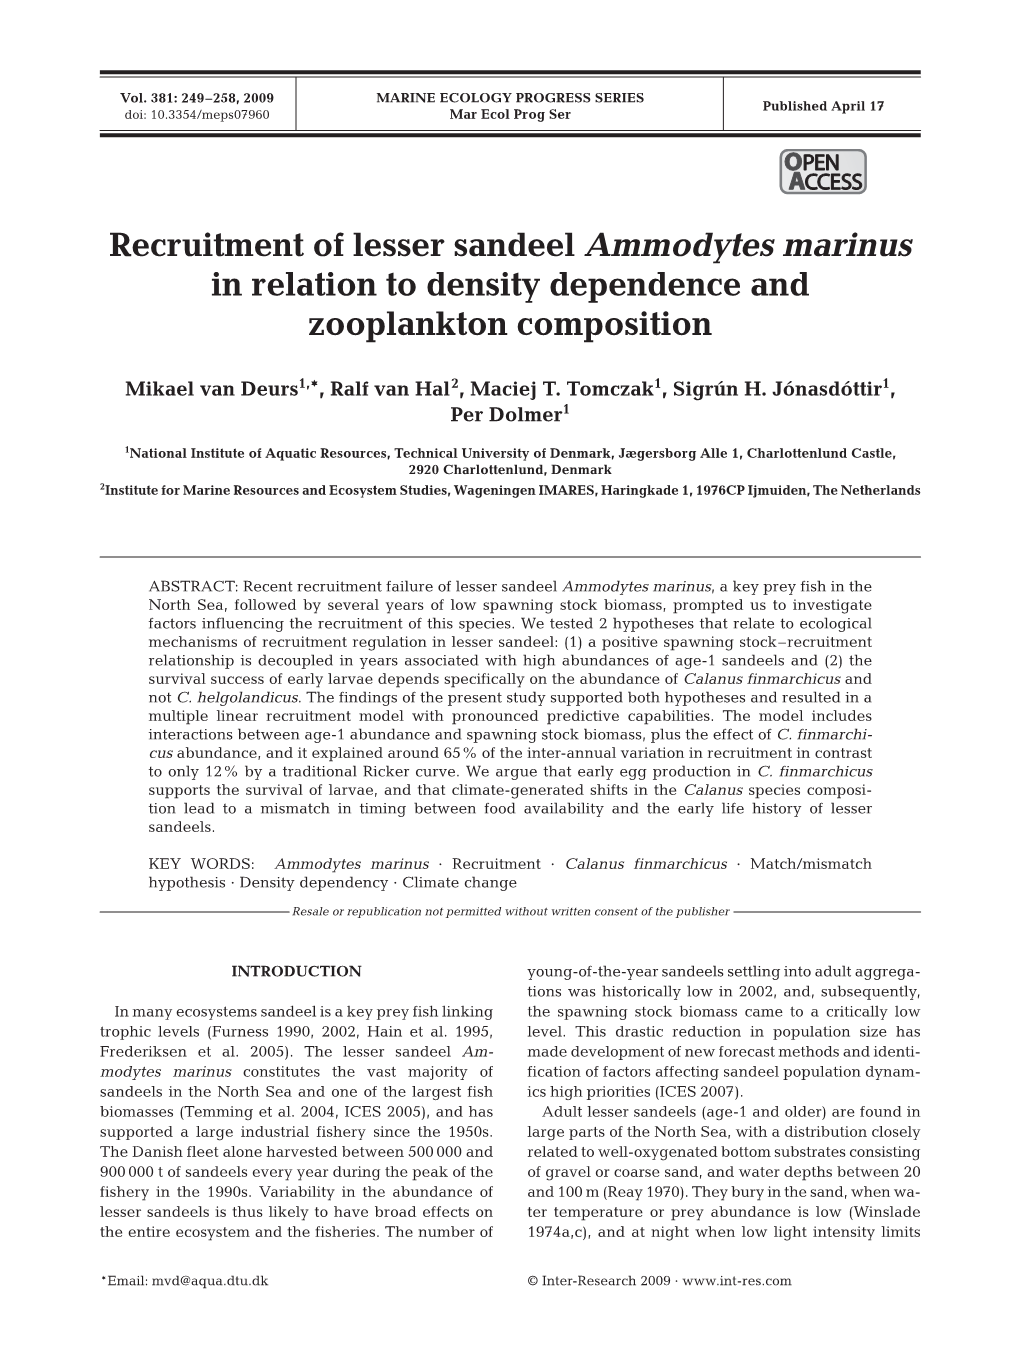 Recruitment of Lesser Sandeel Ammodytes Marinus in Relation to Density Dependence and Zooplankton Composition